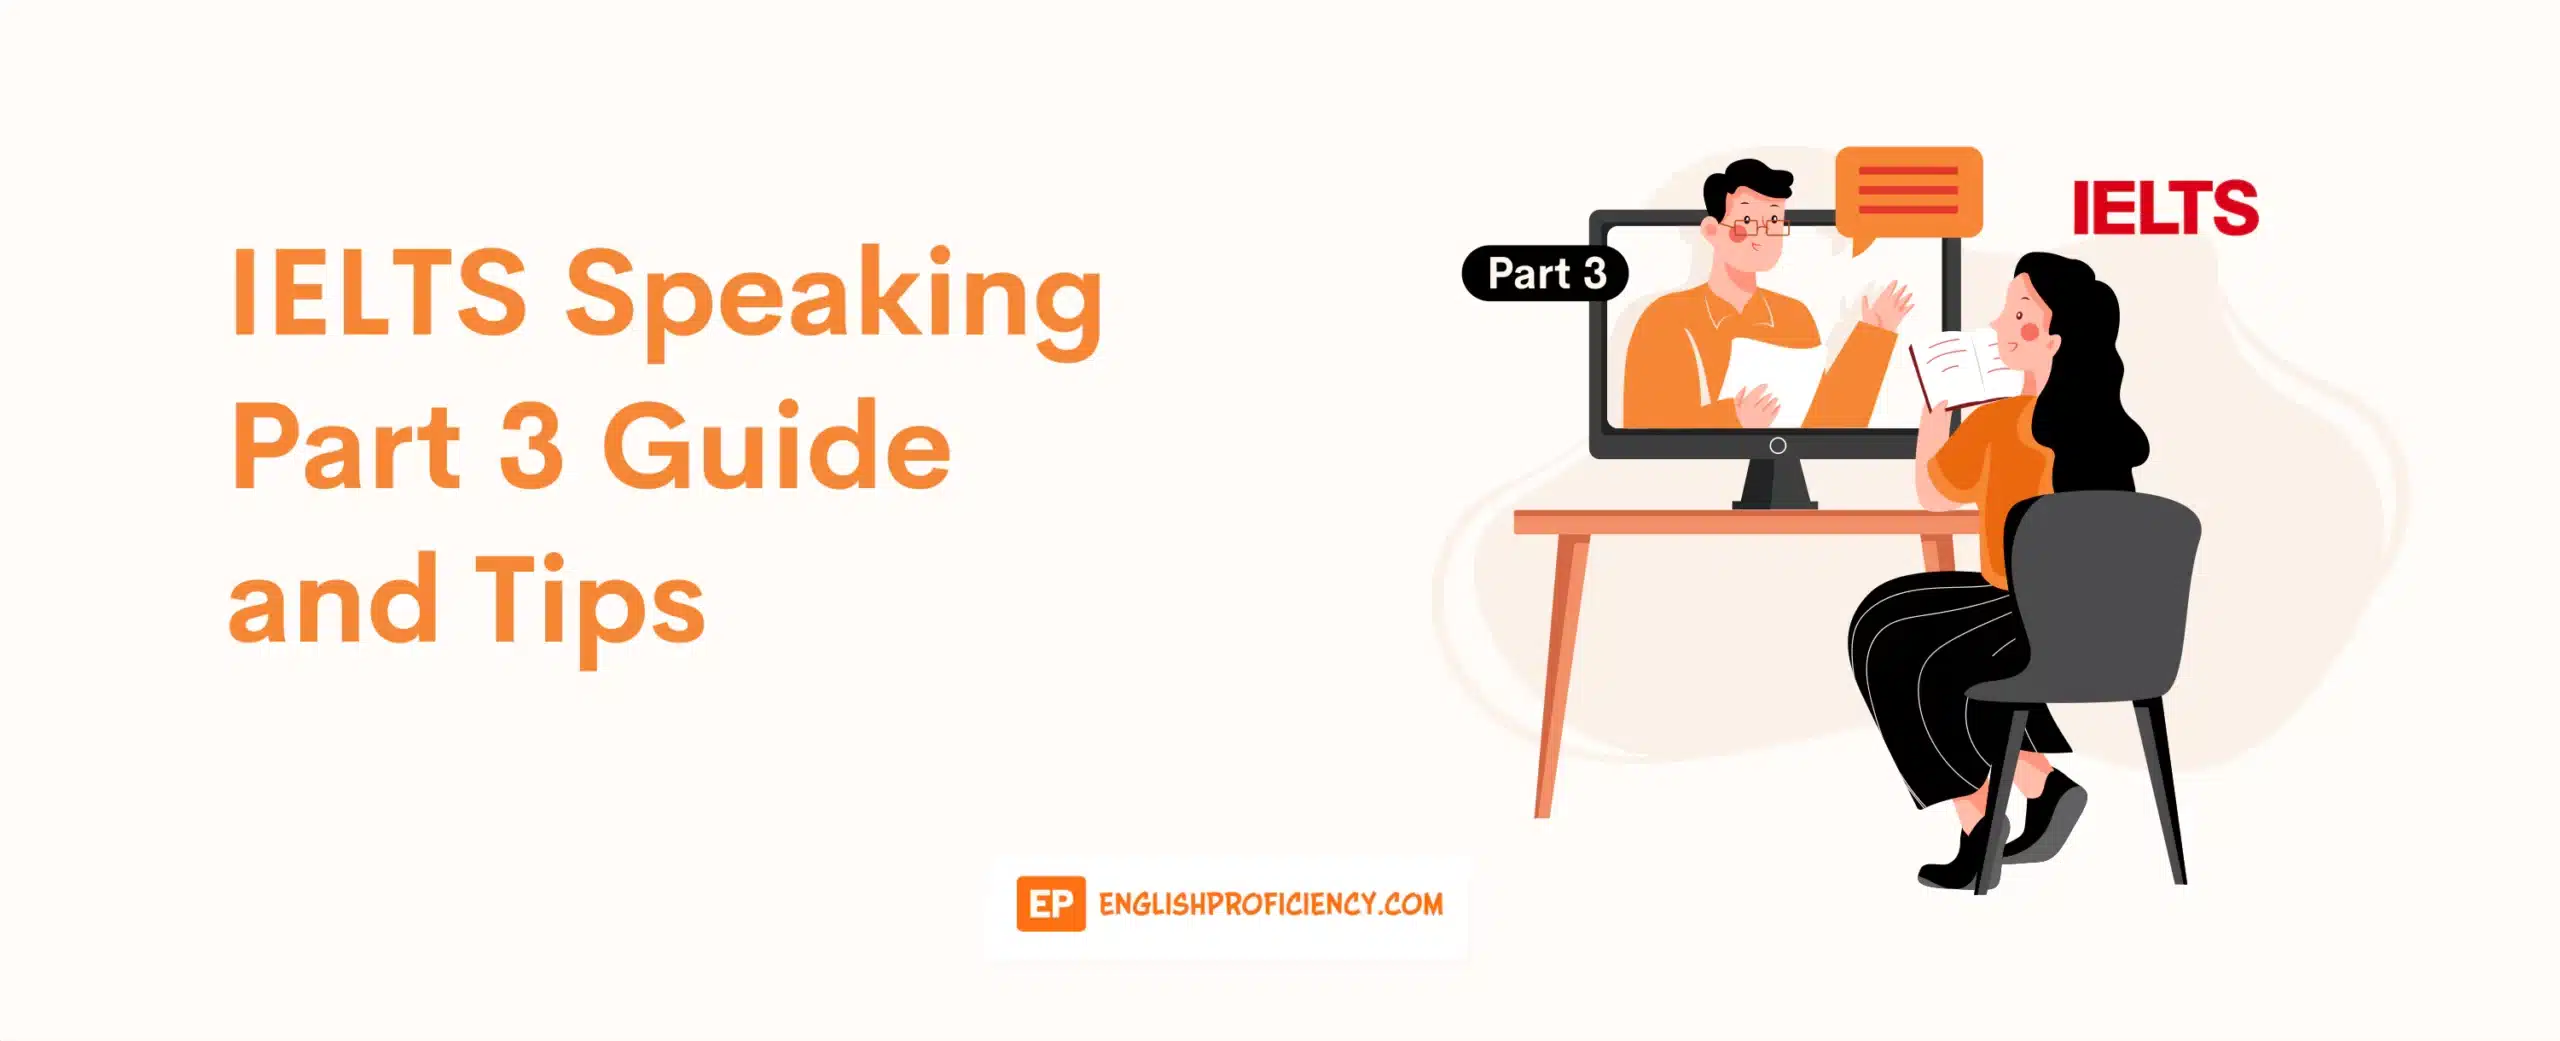 IELTS Speaking Part 3 Guide and Tips